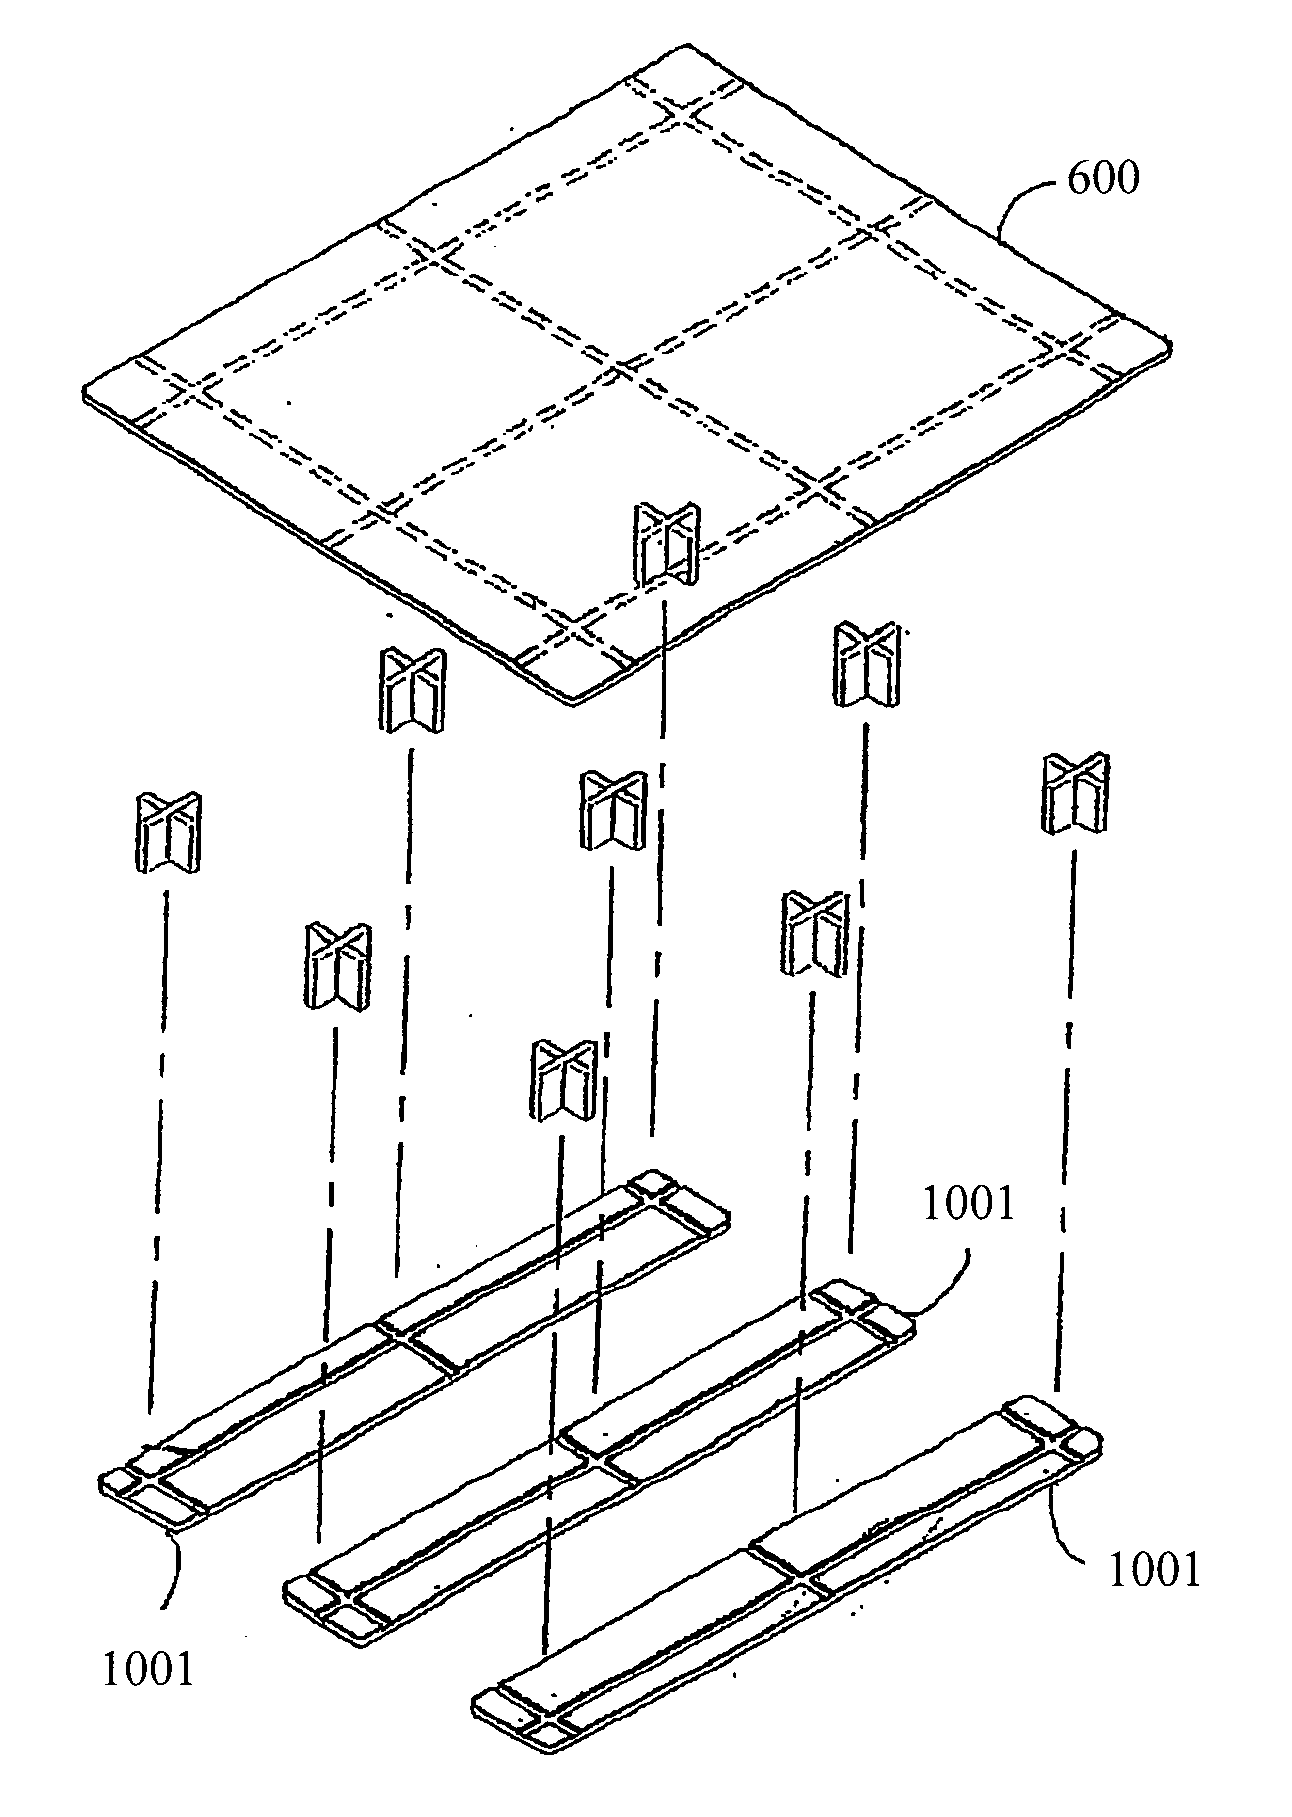 Support device for materials handling